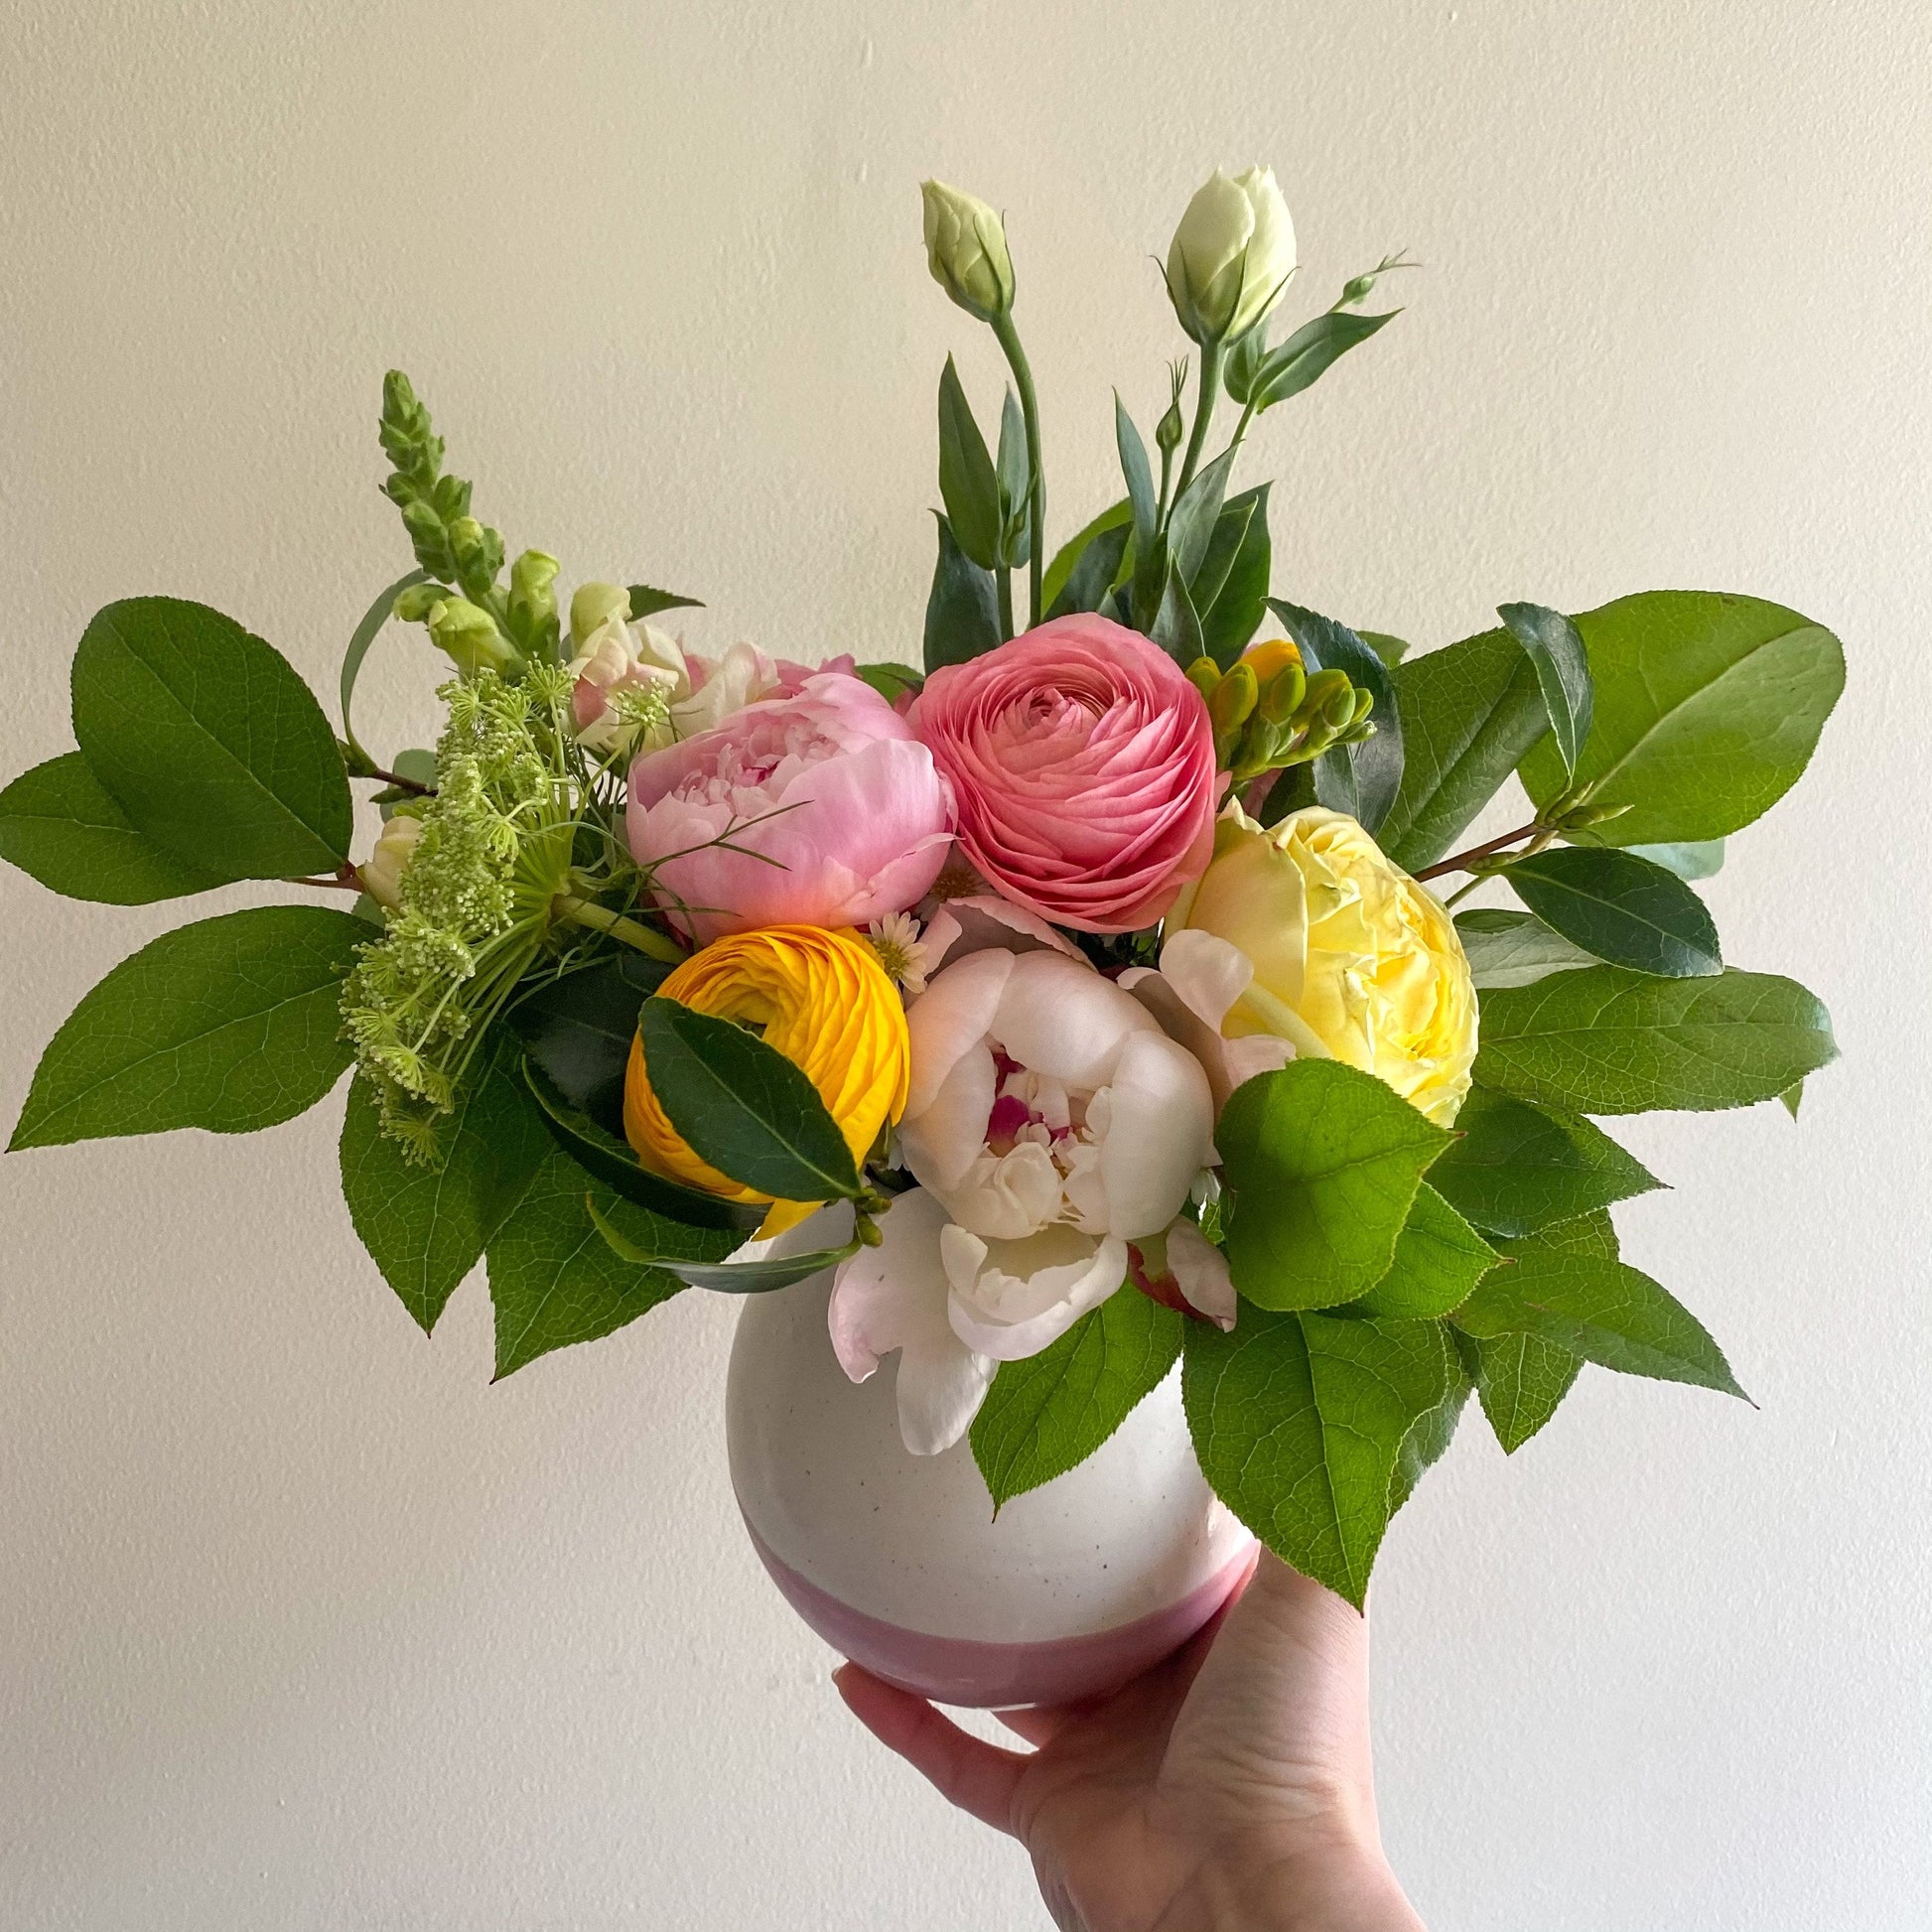 Mother's Day Blooms 💐 Only Available for Mother's Day Weekend - May 8th & 9th - Brave Blooms